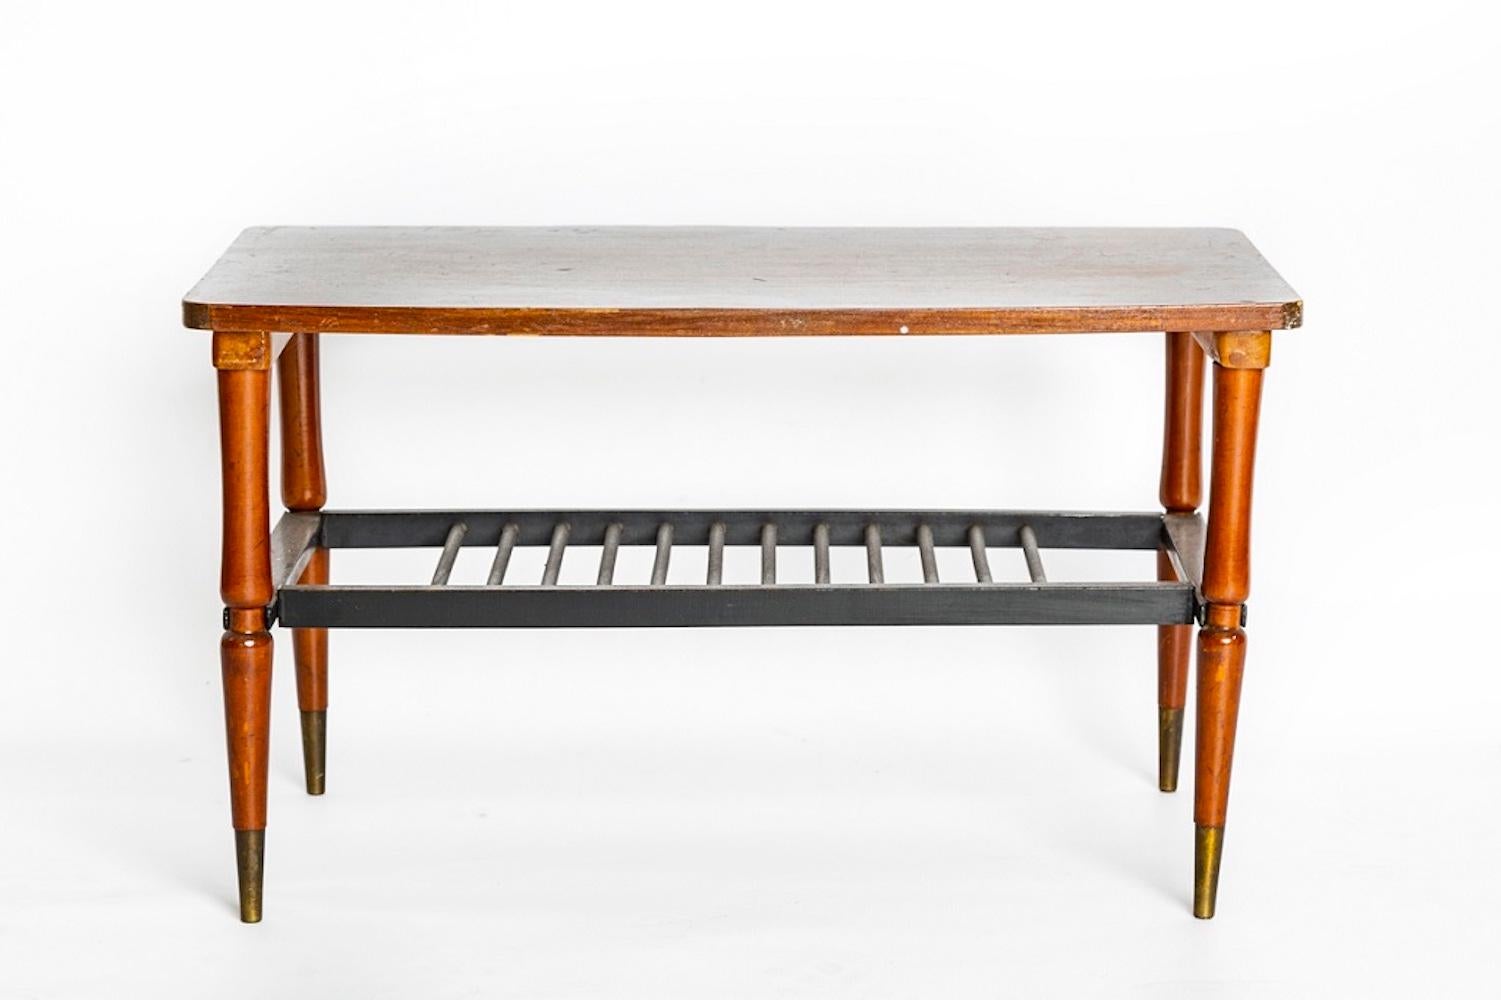 This Coffee Table is an elegant little table realized in the 1960s

The Table was realized by a by Danish manucfacture. The table shape are typical of the Danish Modern Furniture: clean and pure lines designed for human proportions and extremely